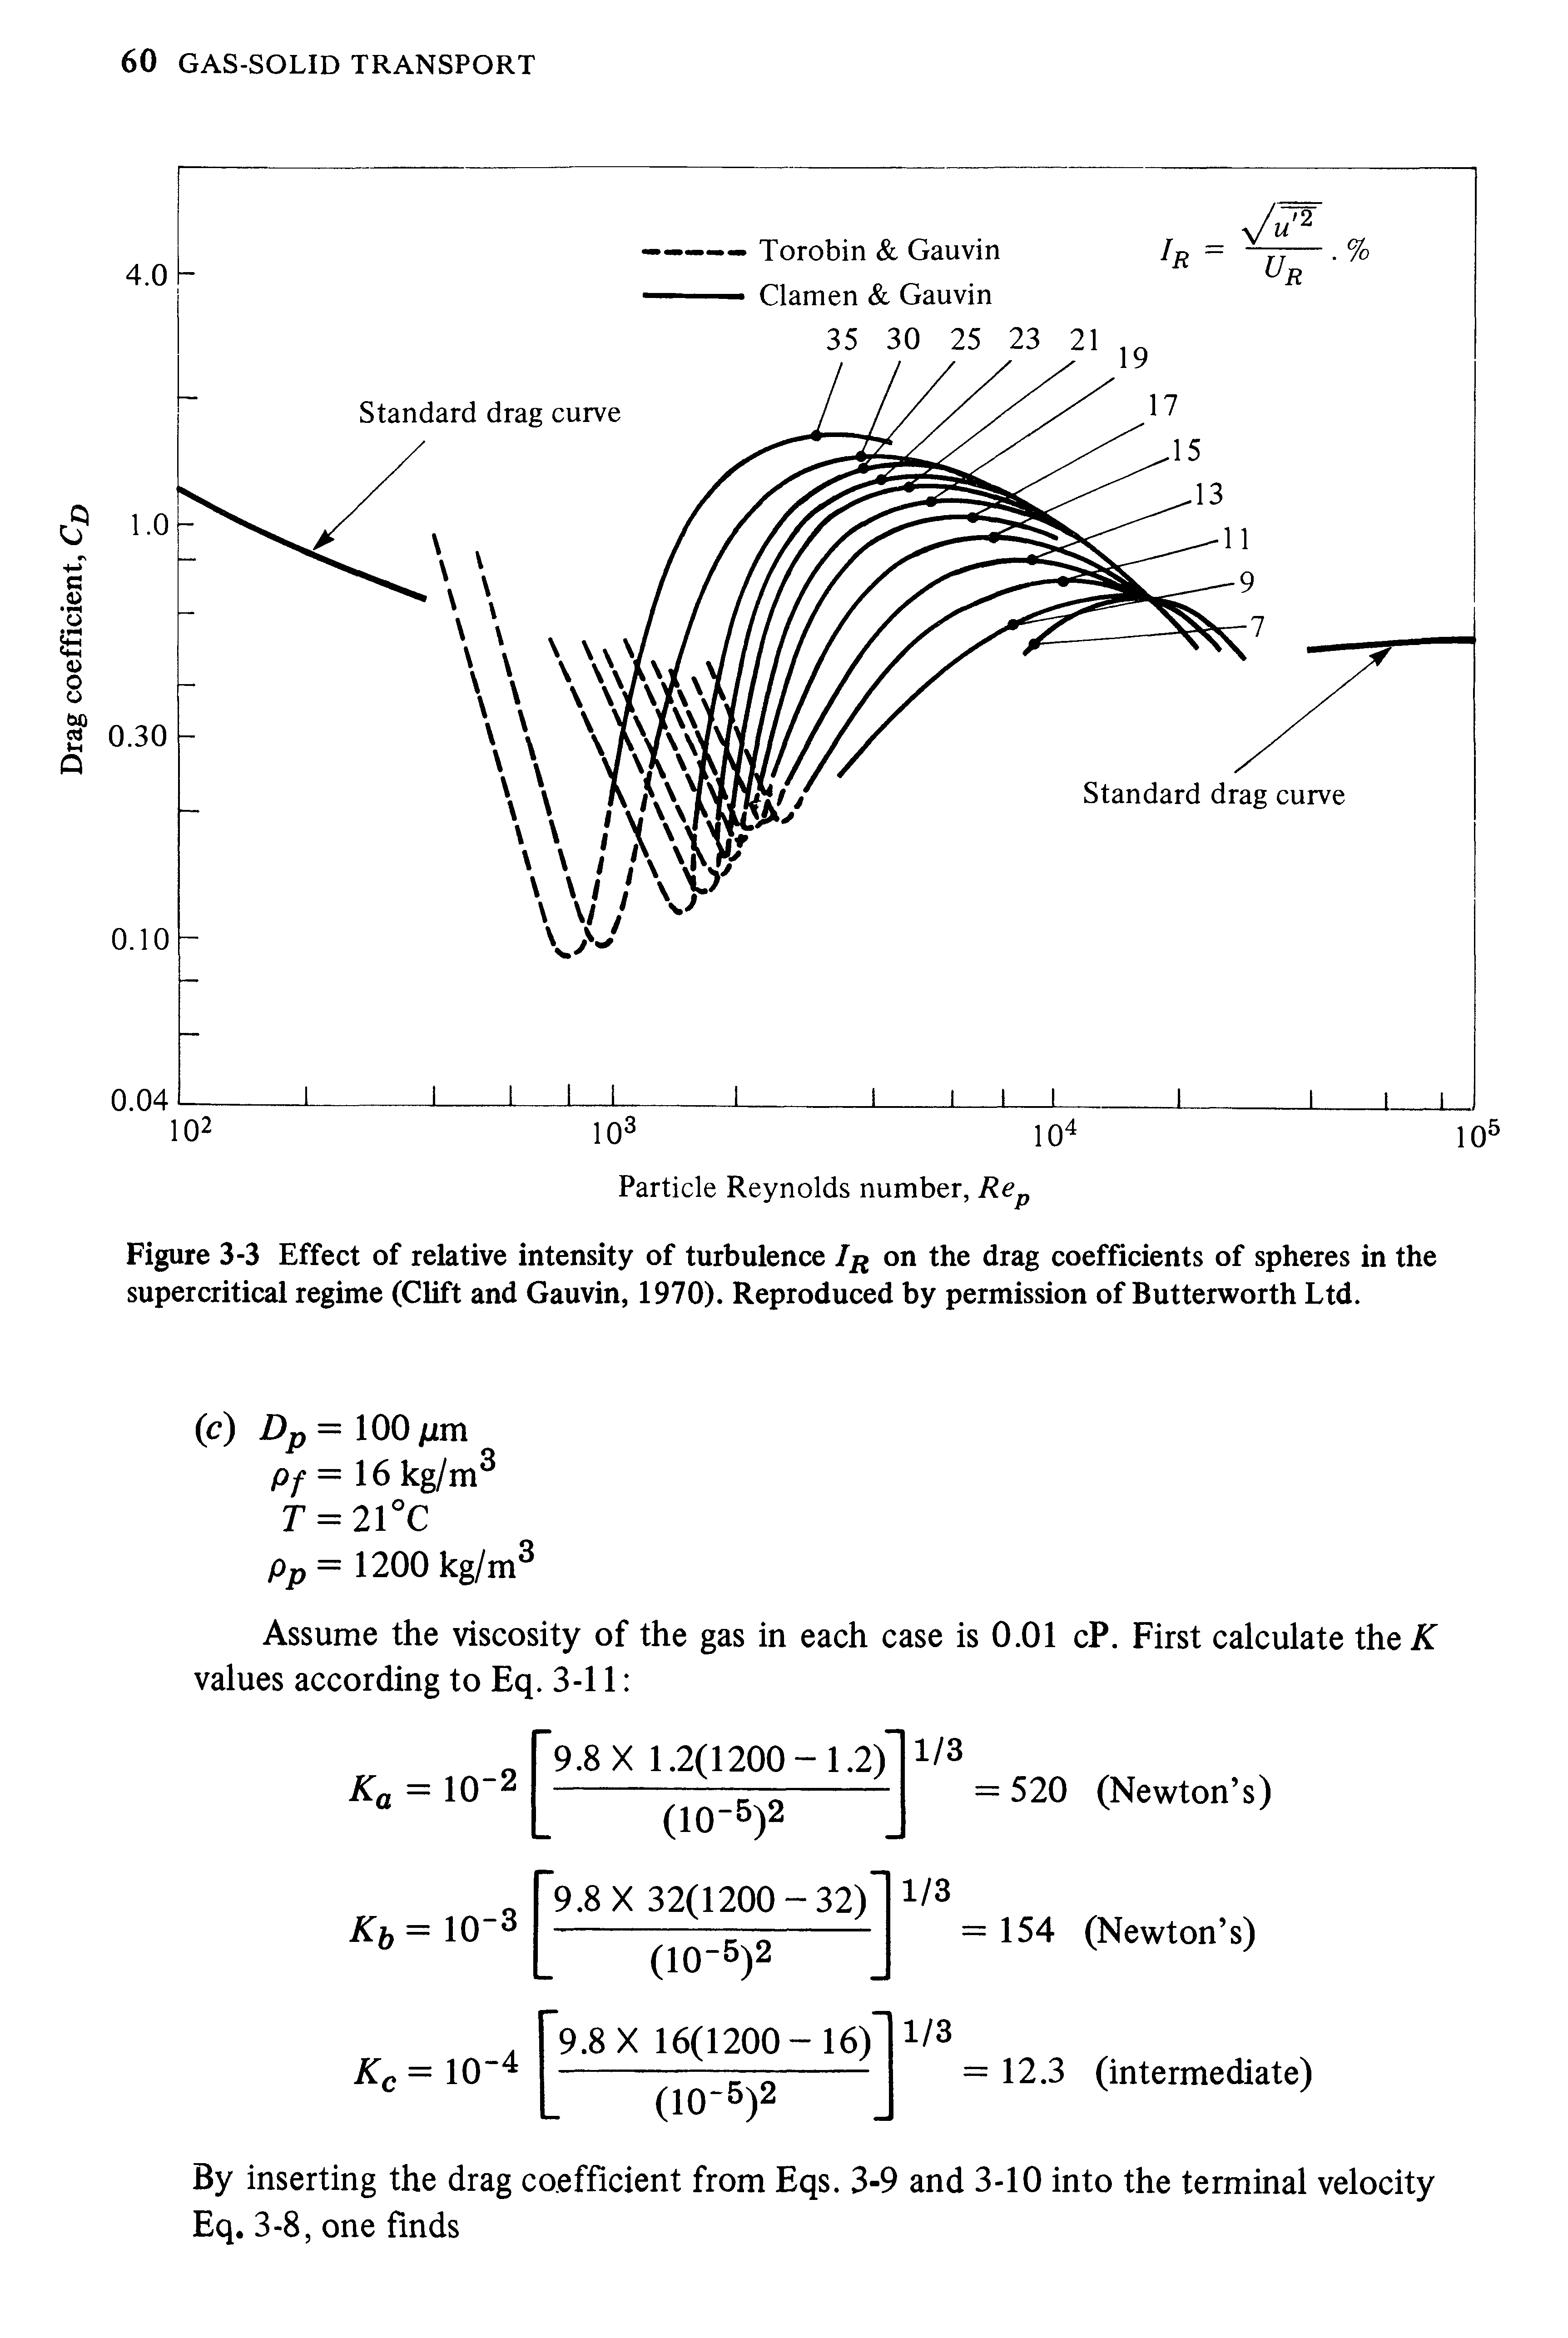 Figure 3-3 Effect of relative intensity of turbulence Iji on the drag coefficients of spheres in the supercritical regime (Clift and Gauvin, 1970). Reproduced by permission of Butterworth Ltd.